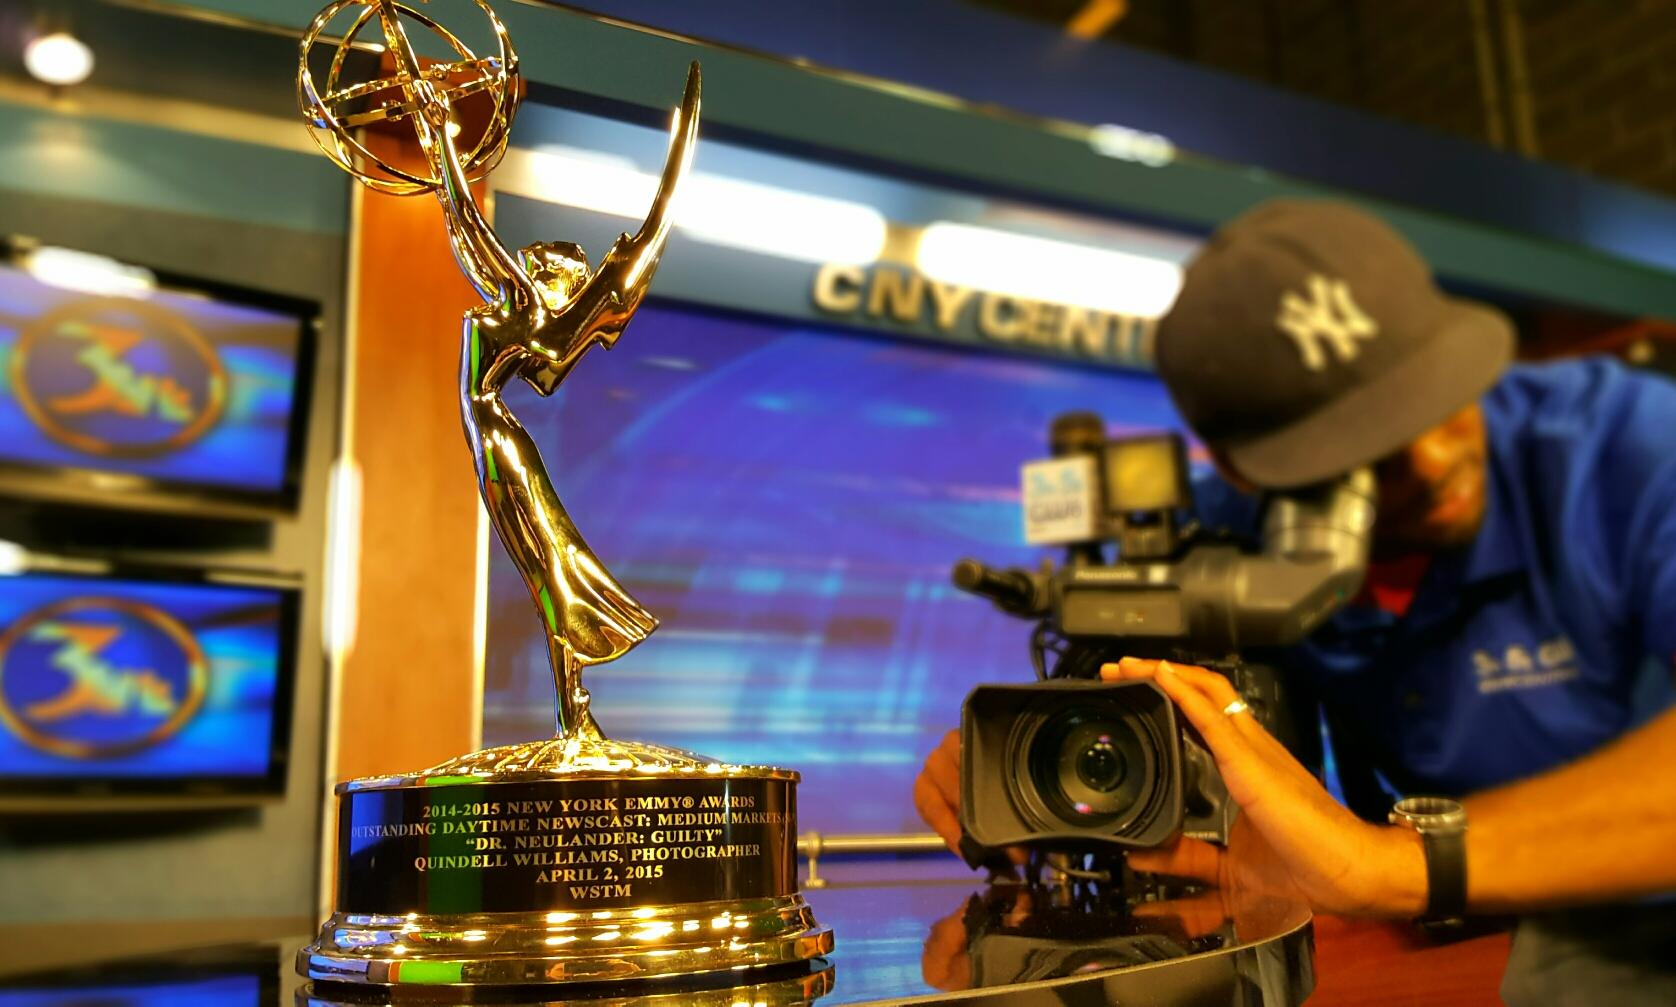 Quindell Williams with his Emmy Award.